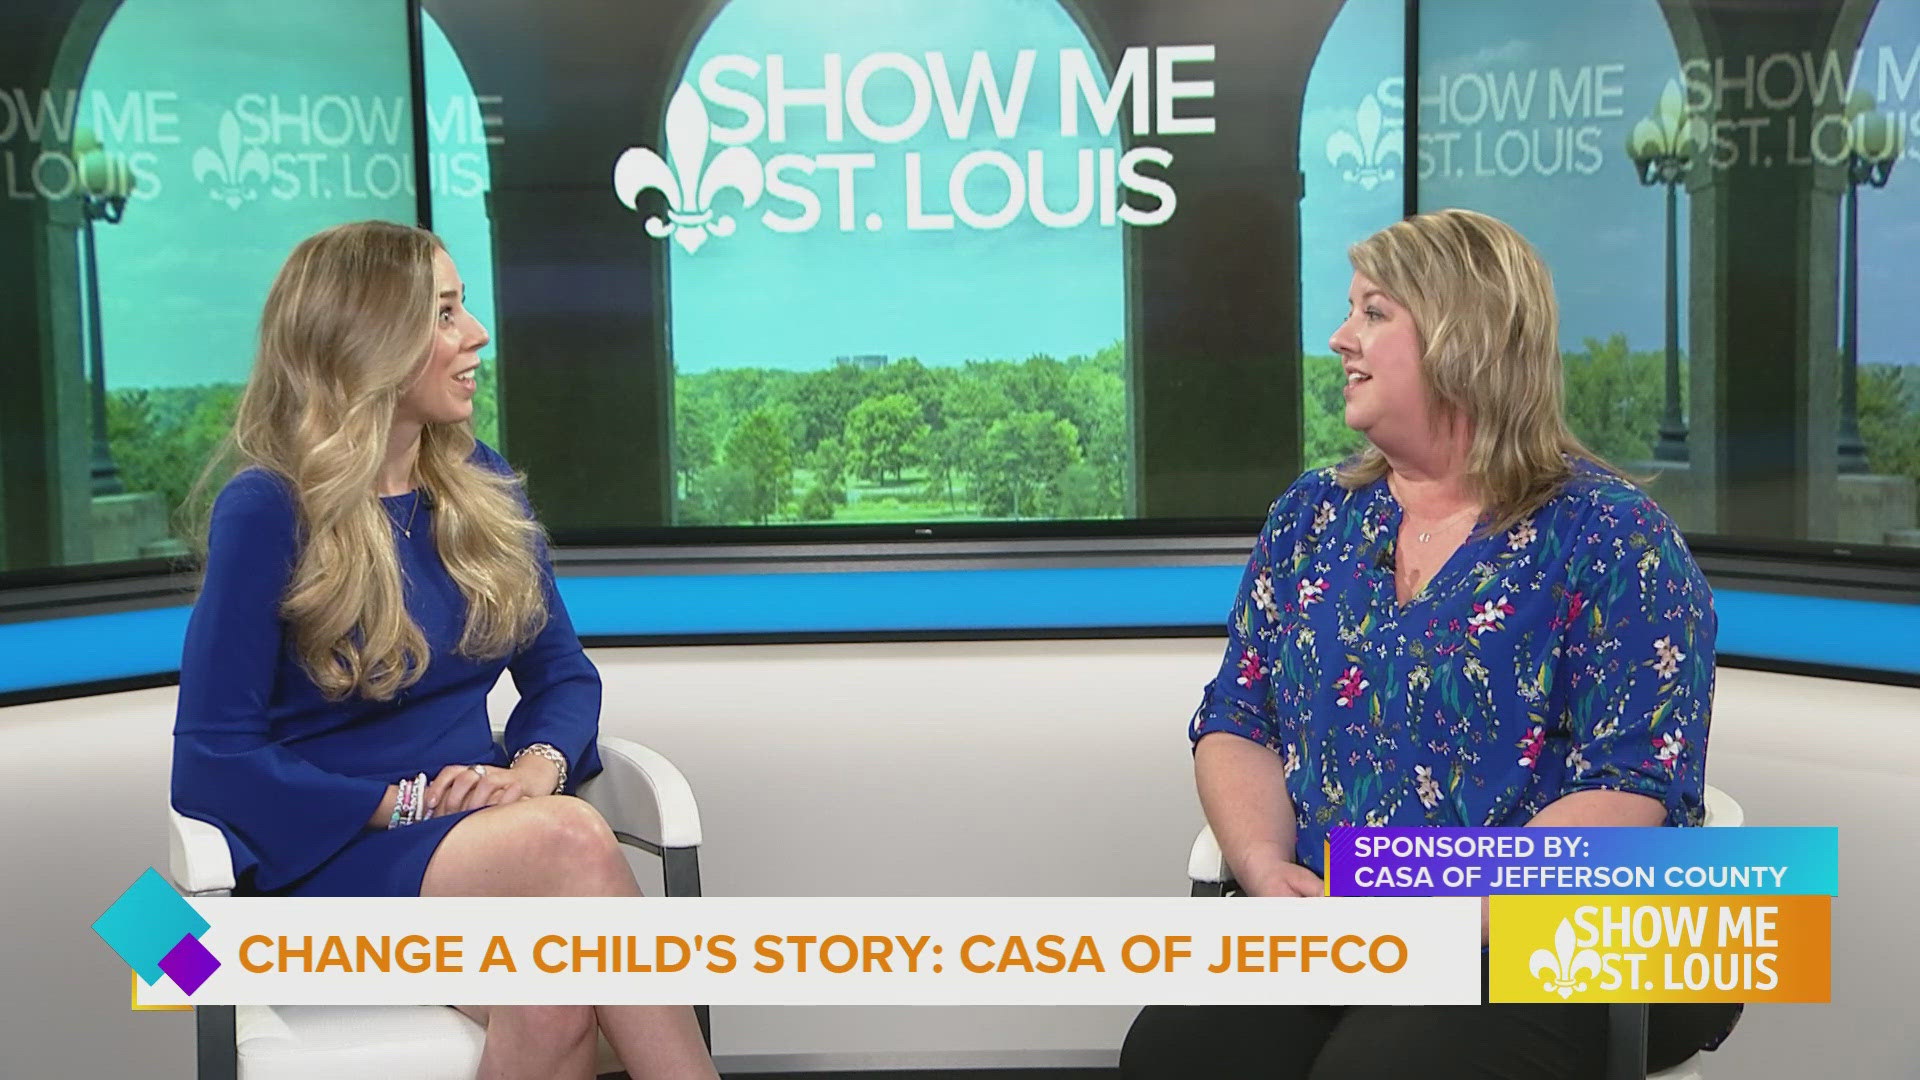 This segment helps to raise awareness of the program and how it helps children in foster care in Jefferson County.